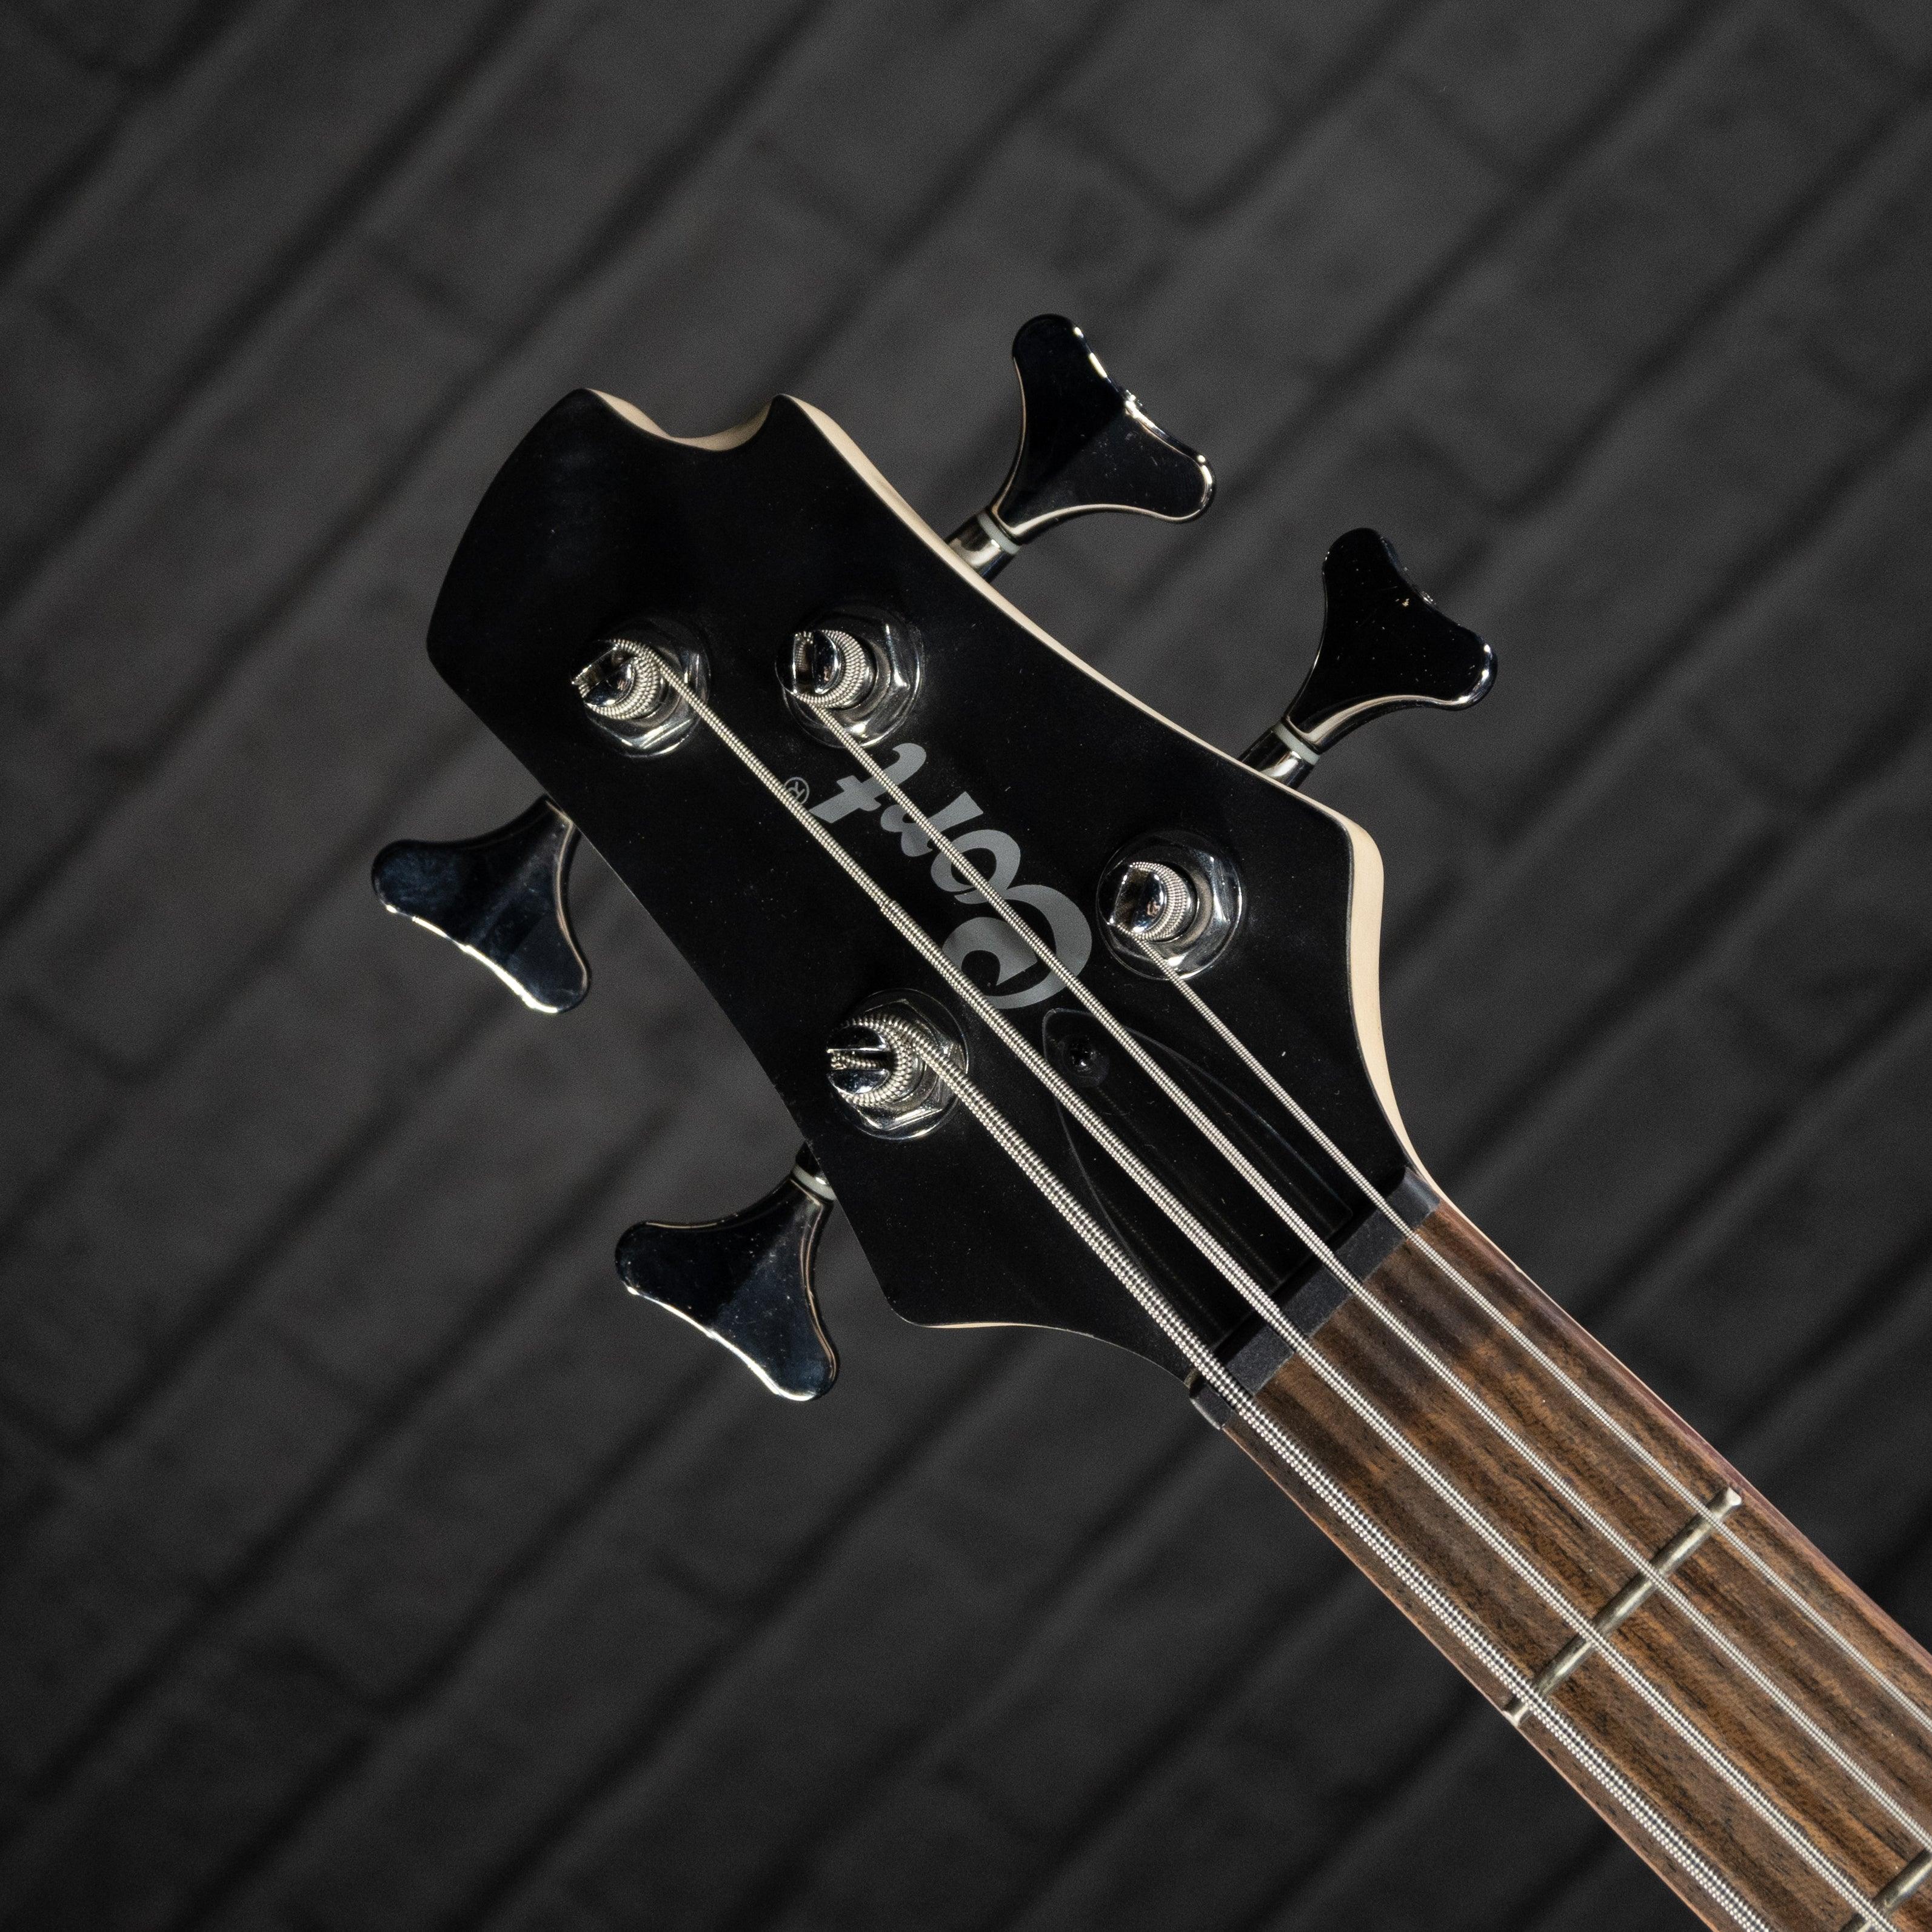 Cort Action Bass Plus  Action Series Electric Bass